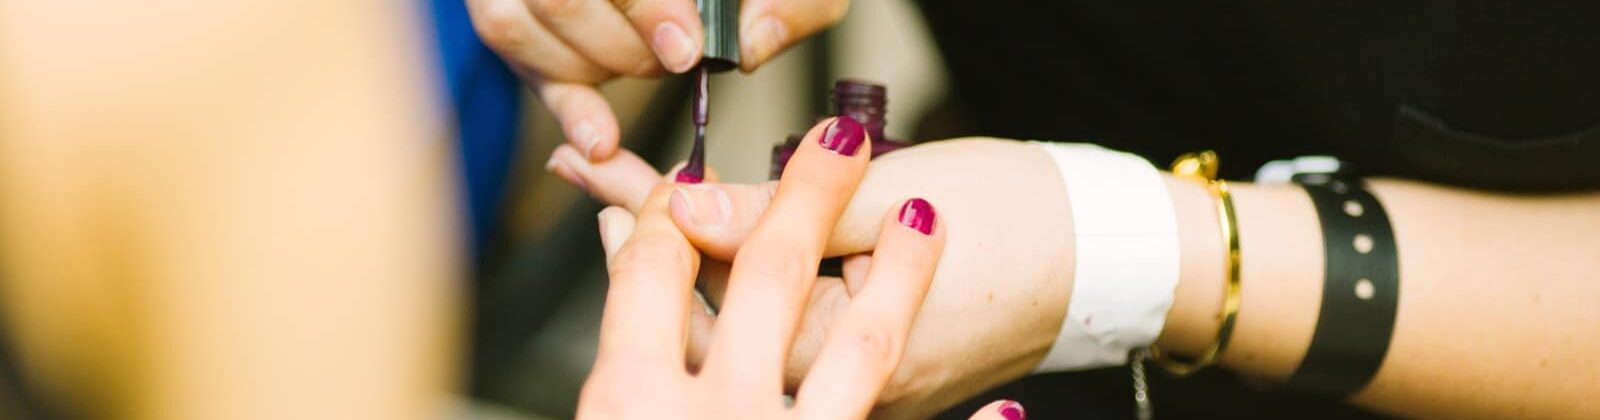 37 Shellac Nails Ideas Trending Now Summer 2019